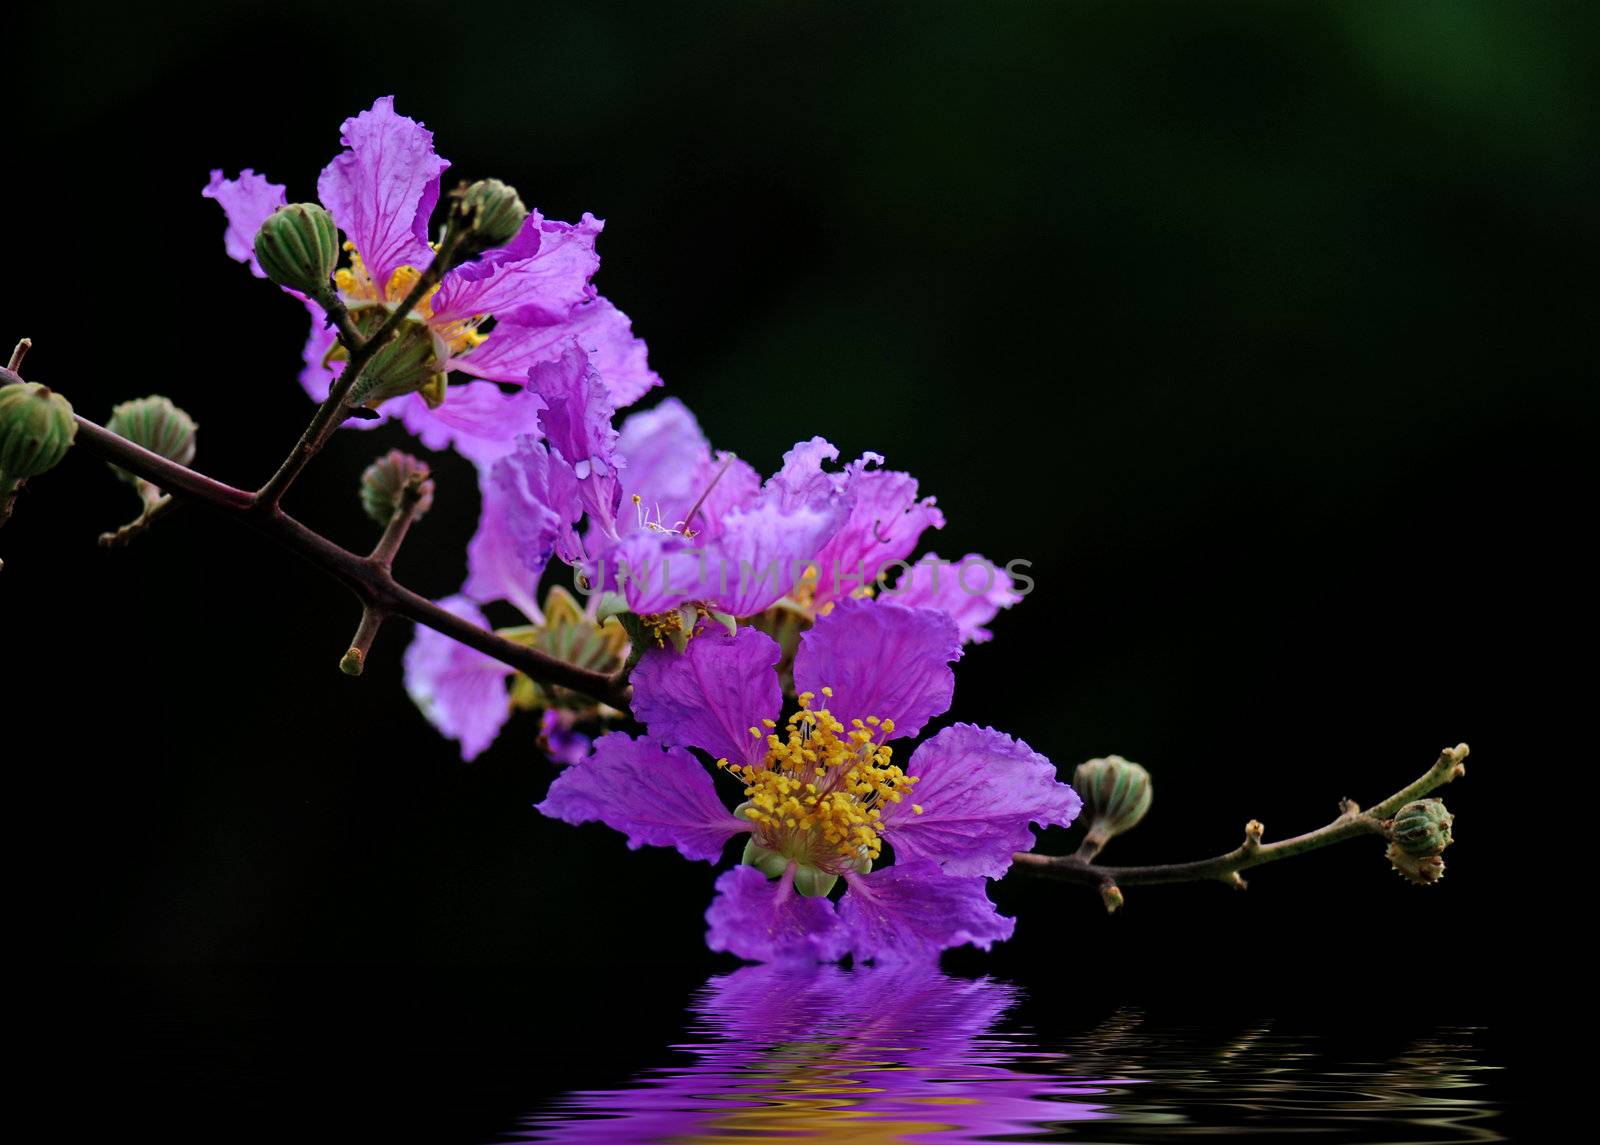 Crape myrtle and his reflection in water